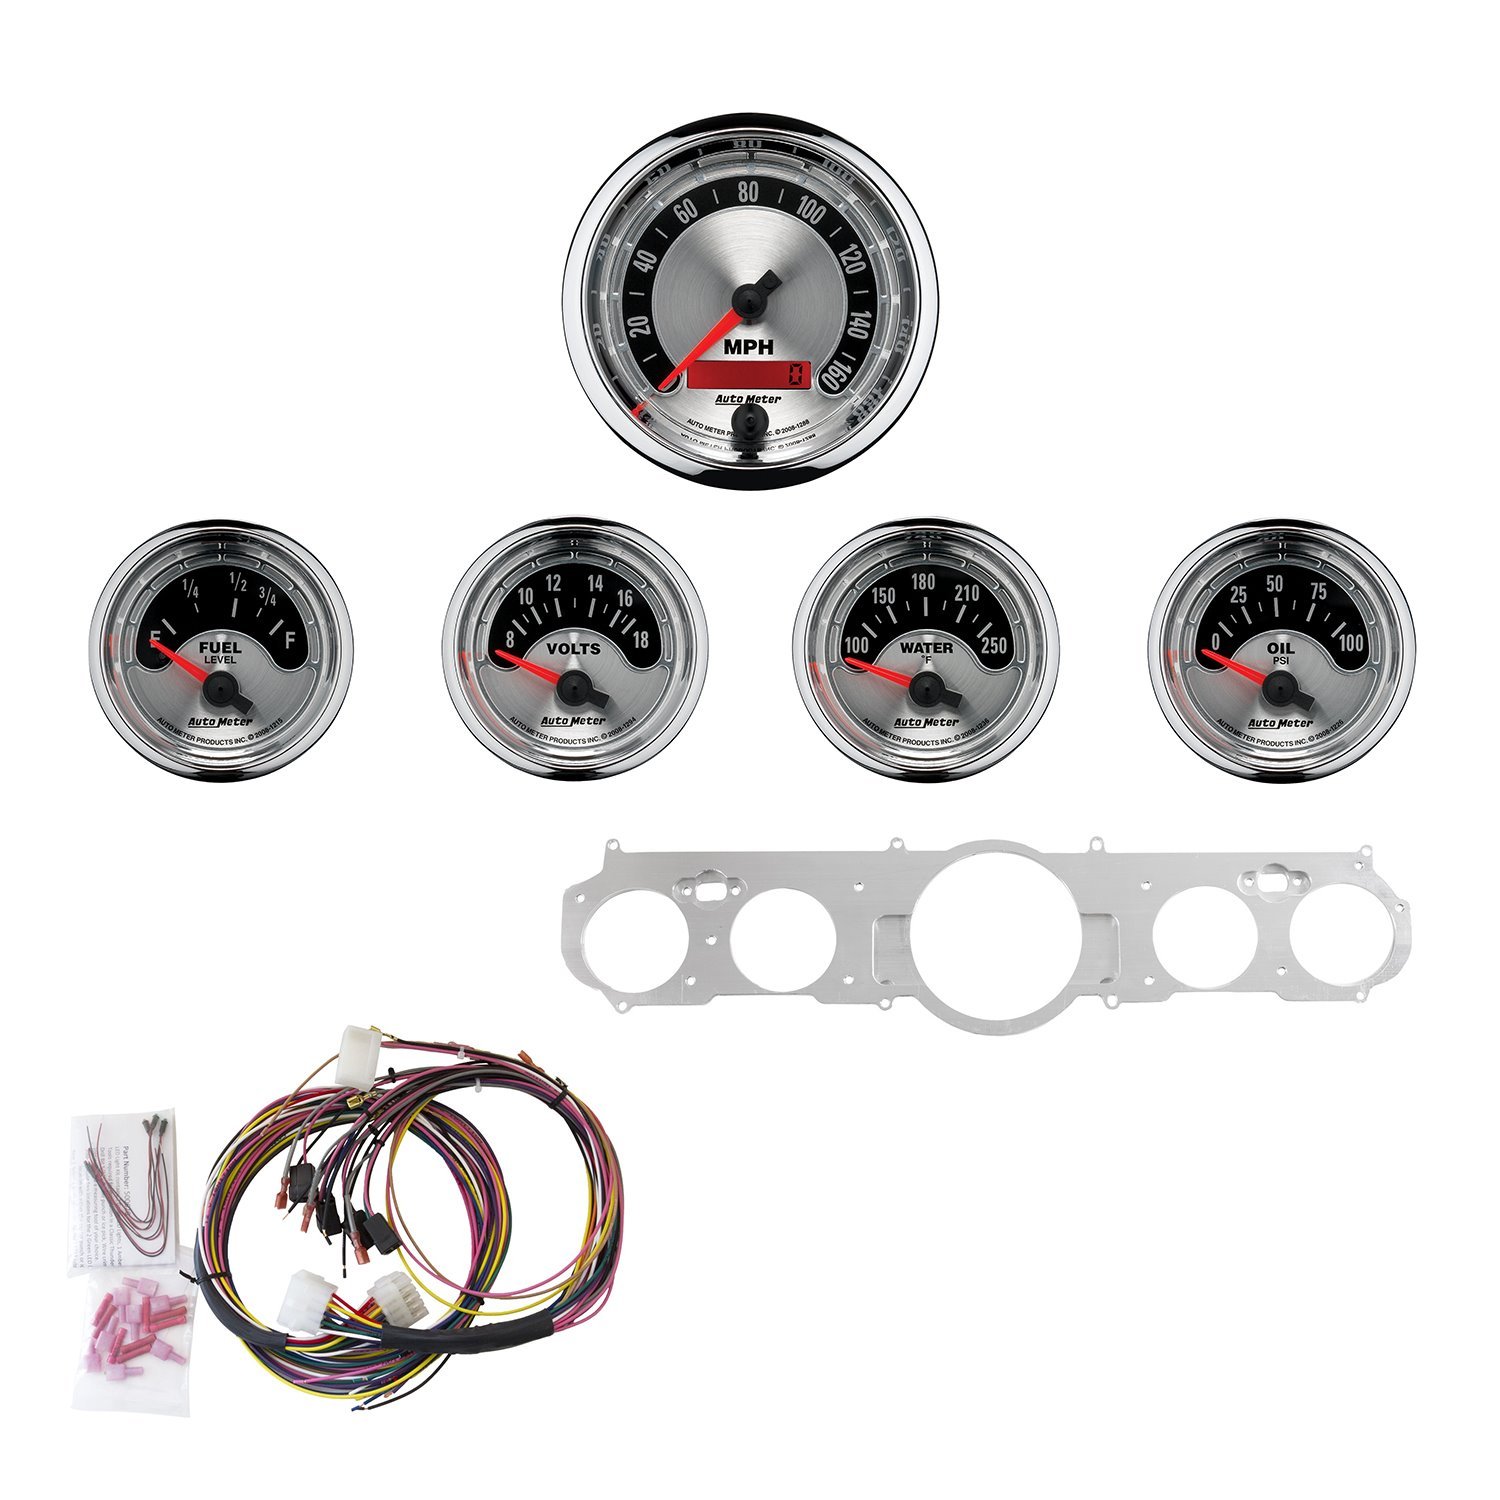 5-Gauge Direct-Fit Dash Kit 1965-1966 Ford Mustang - American Muscle Series - Polished Panel